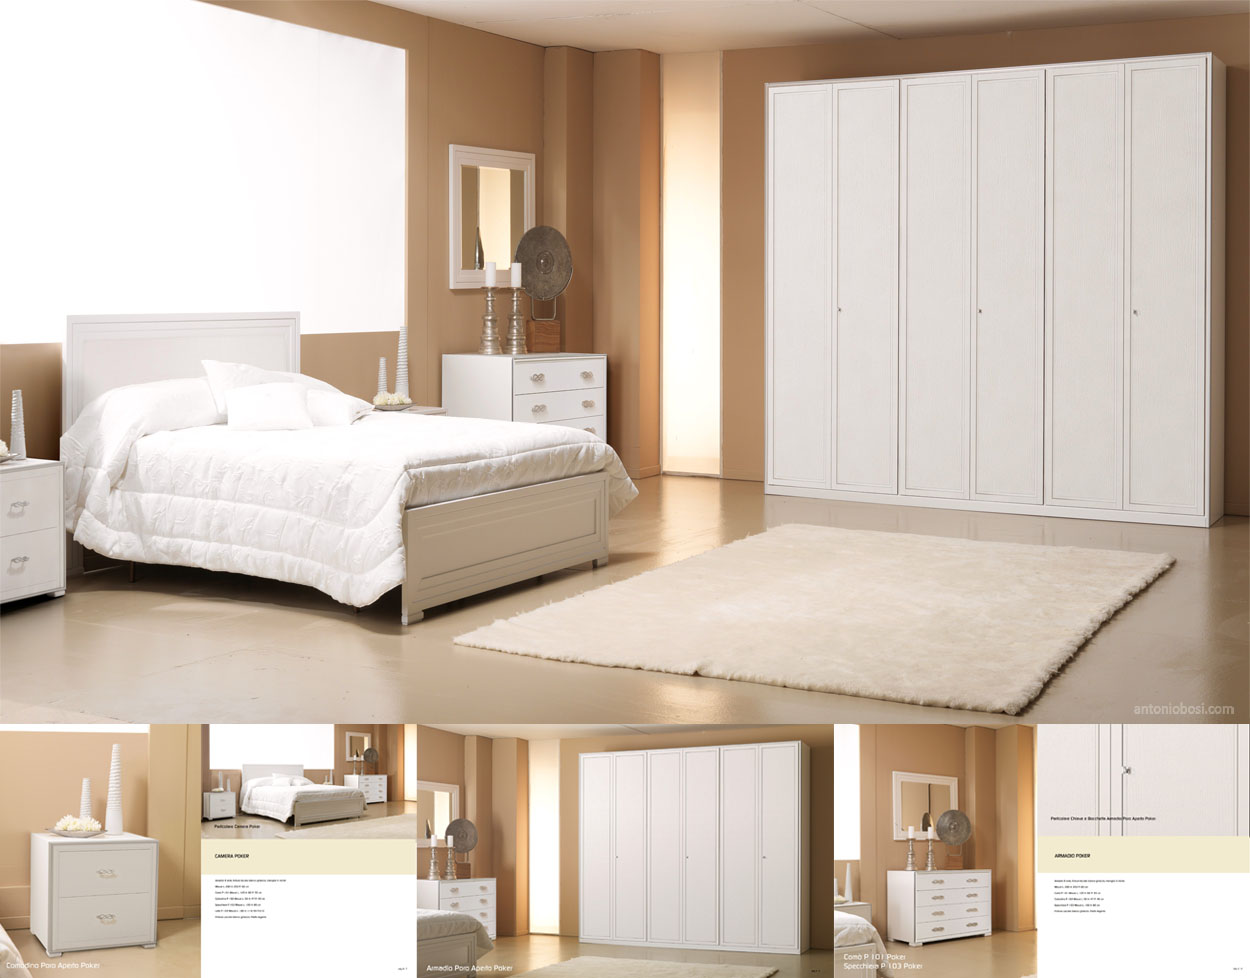 Bedroom Render with Wood Cabinet 3d and Furnishing